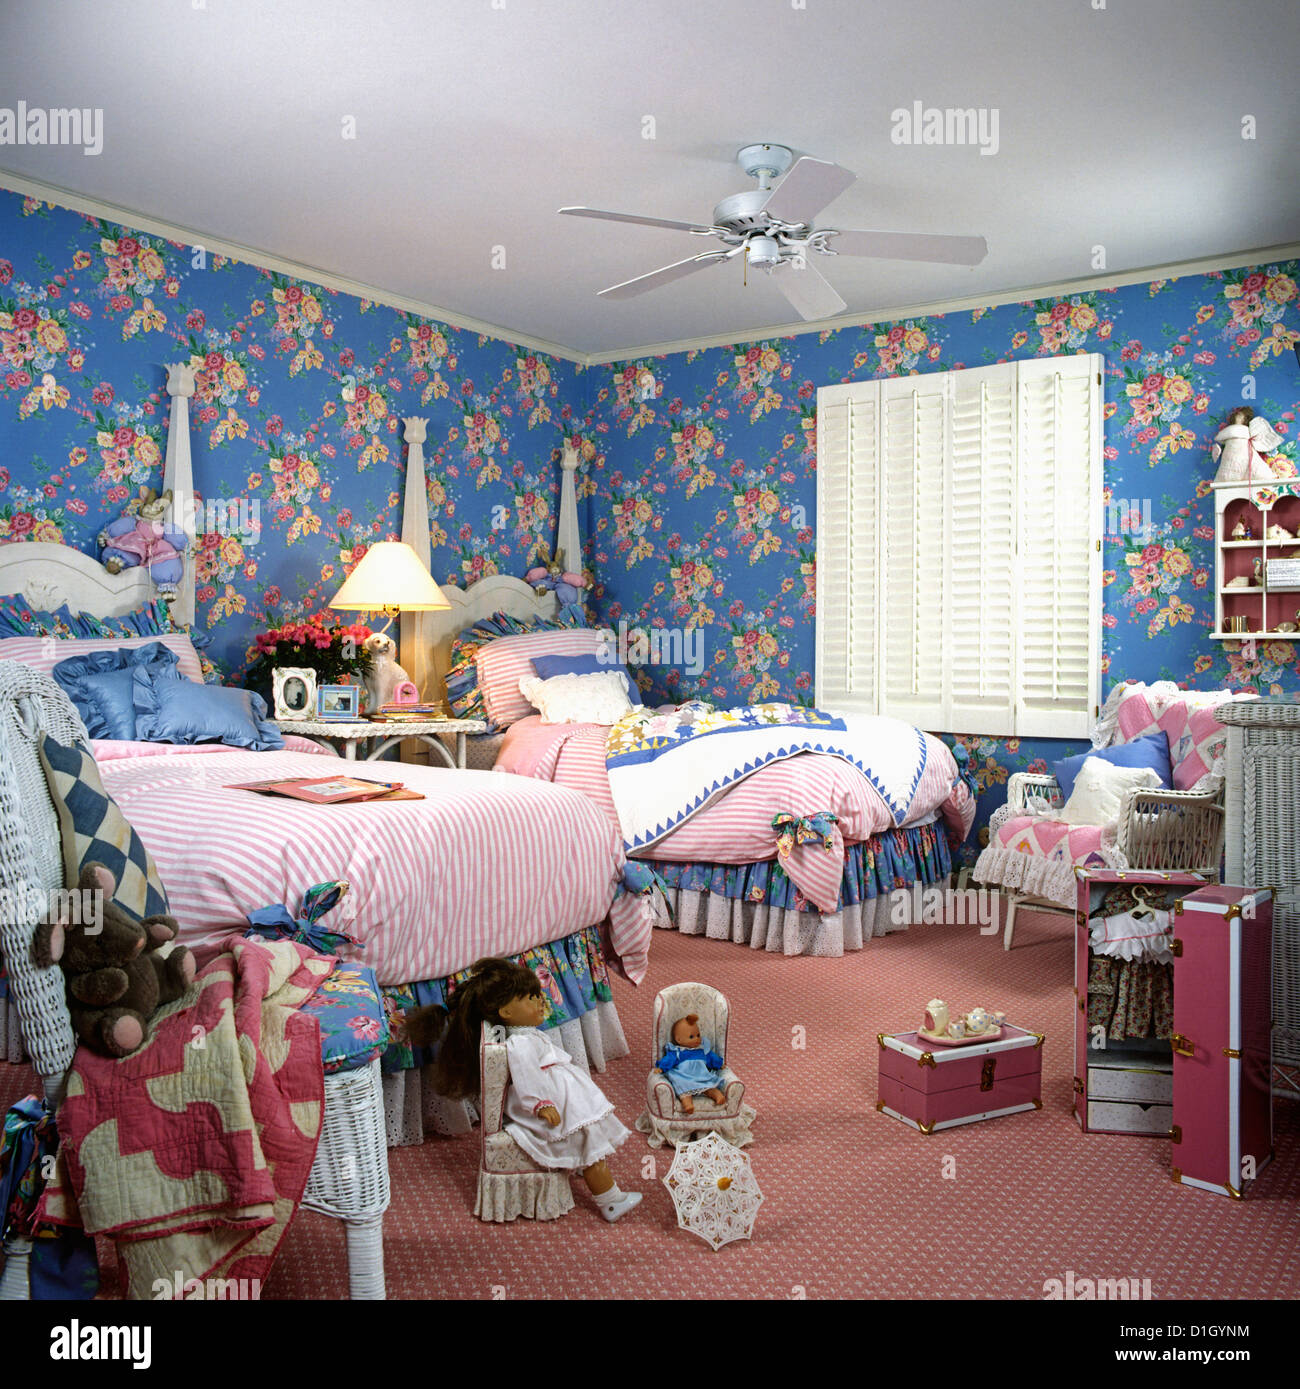 CHILDREN'S BEDROOM: Girl's twin two poster beds, blue and pink floral walls. Pink rug. White wood shutters at window. Dolls. Stock Photo